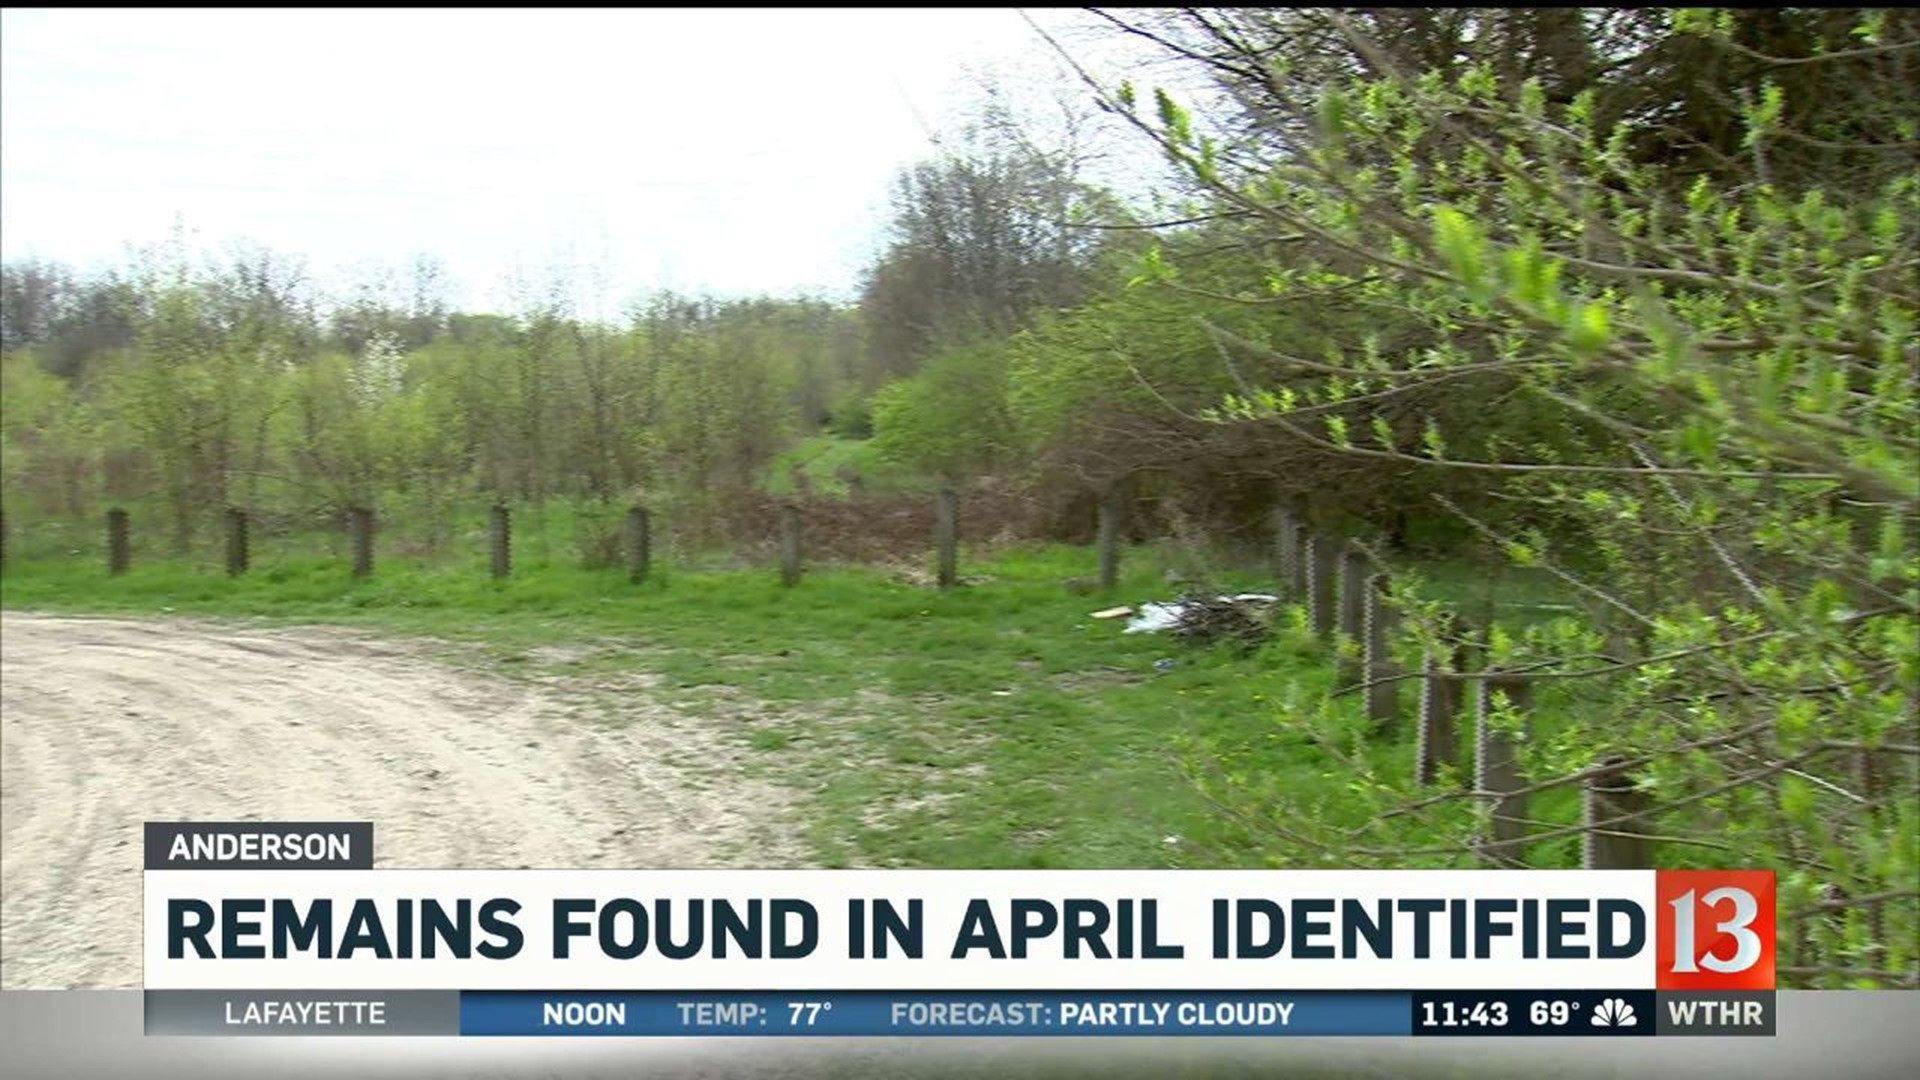 Remains found in April identified